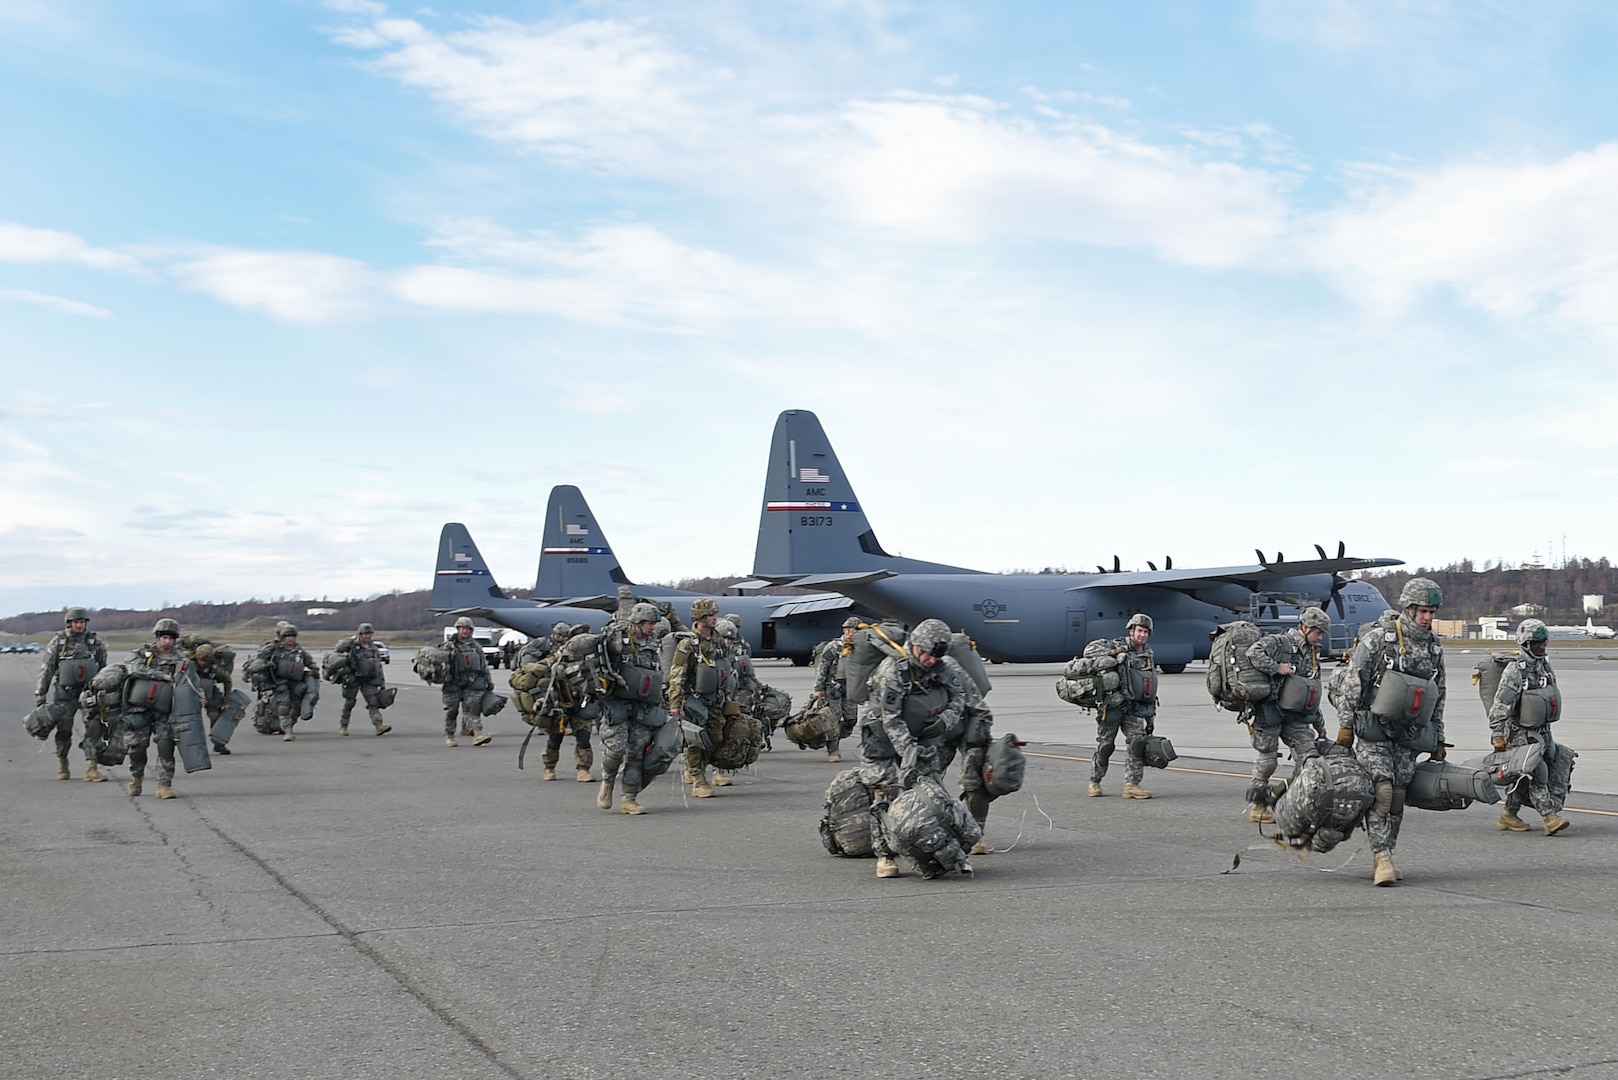 Paratroopers with the 4th Infantry Brigade Combat Team (Airborne), 25th Infantry Division, U.S. Army Alaska, prepare to board a Royal New Zealand Air Force C-130 Hercules during Red Flag Alaska 17-1 at Joint Base Elmendorf-Richardson, Alaska, Oct. 12, 2016. Red Flag-Alaska exercises are focused on improving the combat readiness of U.S. and international forces and providing training for units preparing for Air Expeditionary Force taskings. 